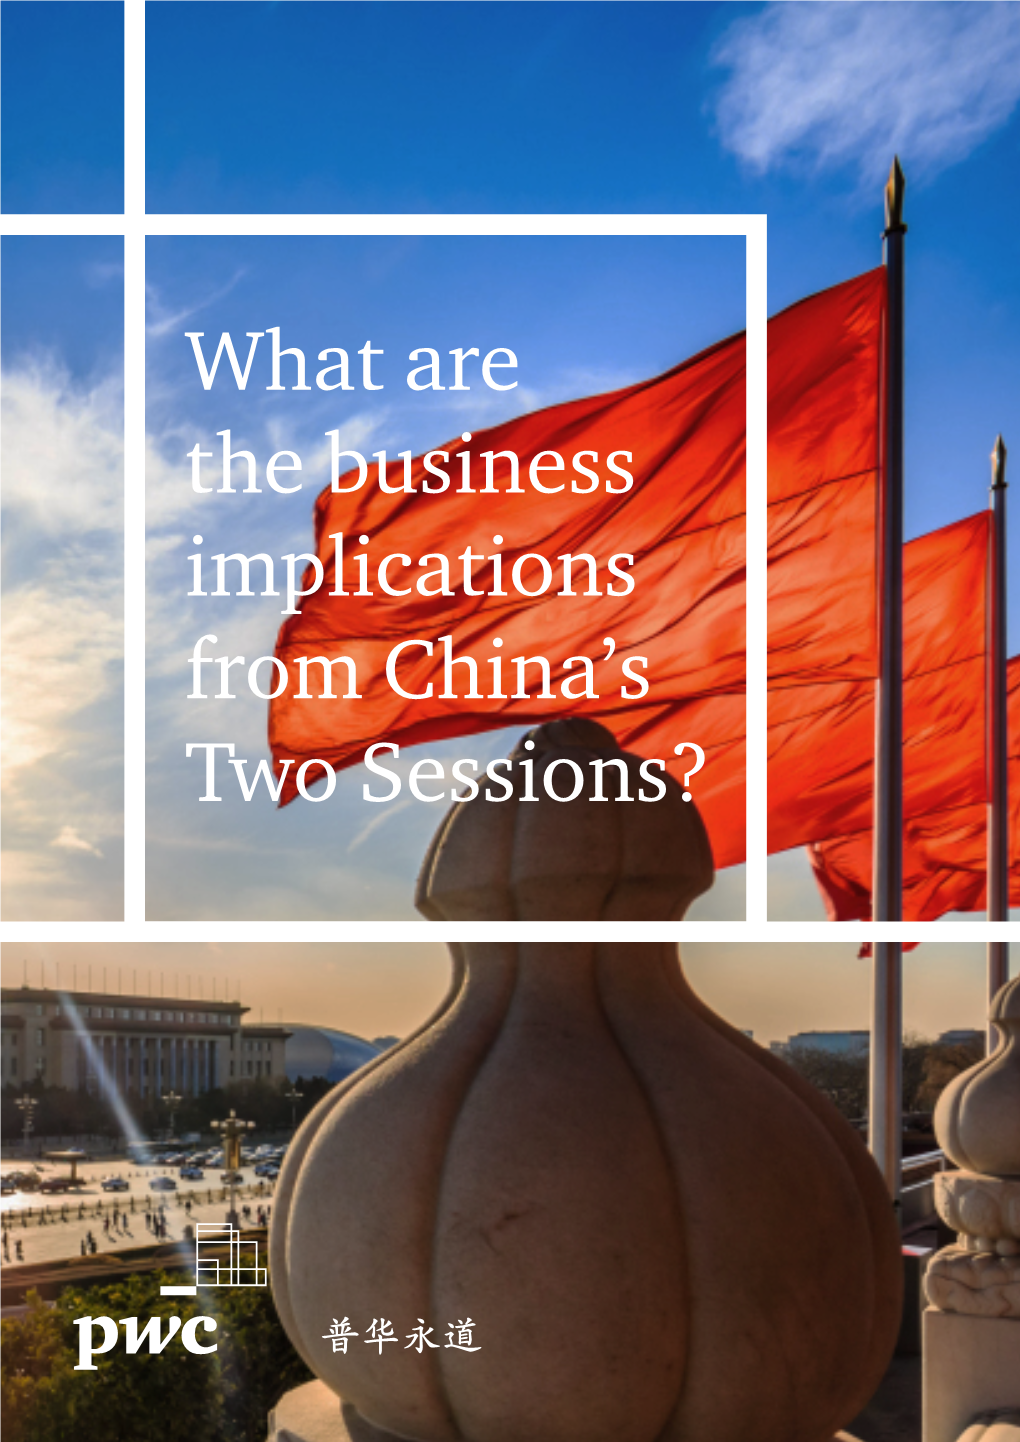 What Are the Business Implications from China's Two Sessions?